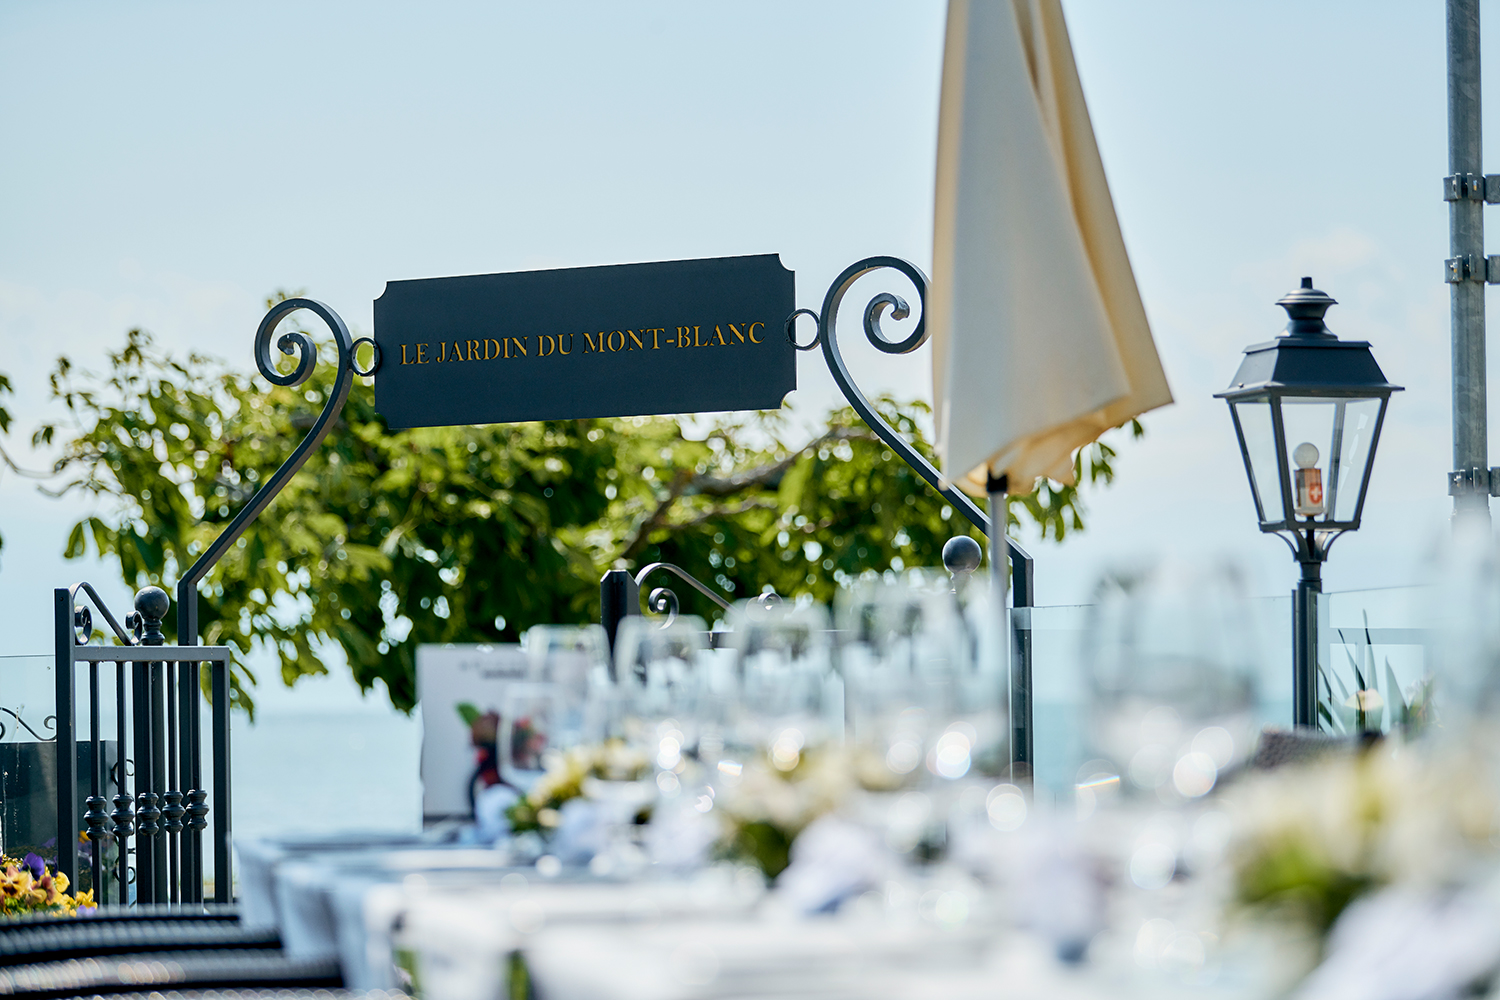 Article De Jardin Charmant Restaurant In Morges with Terrace On Lake Shores Hotel